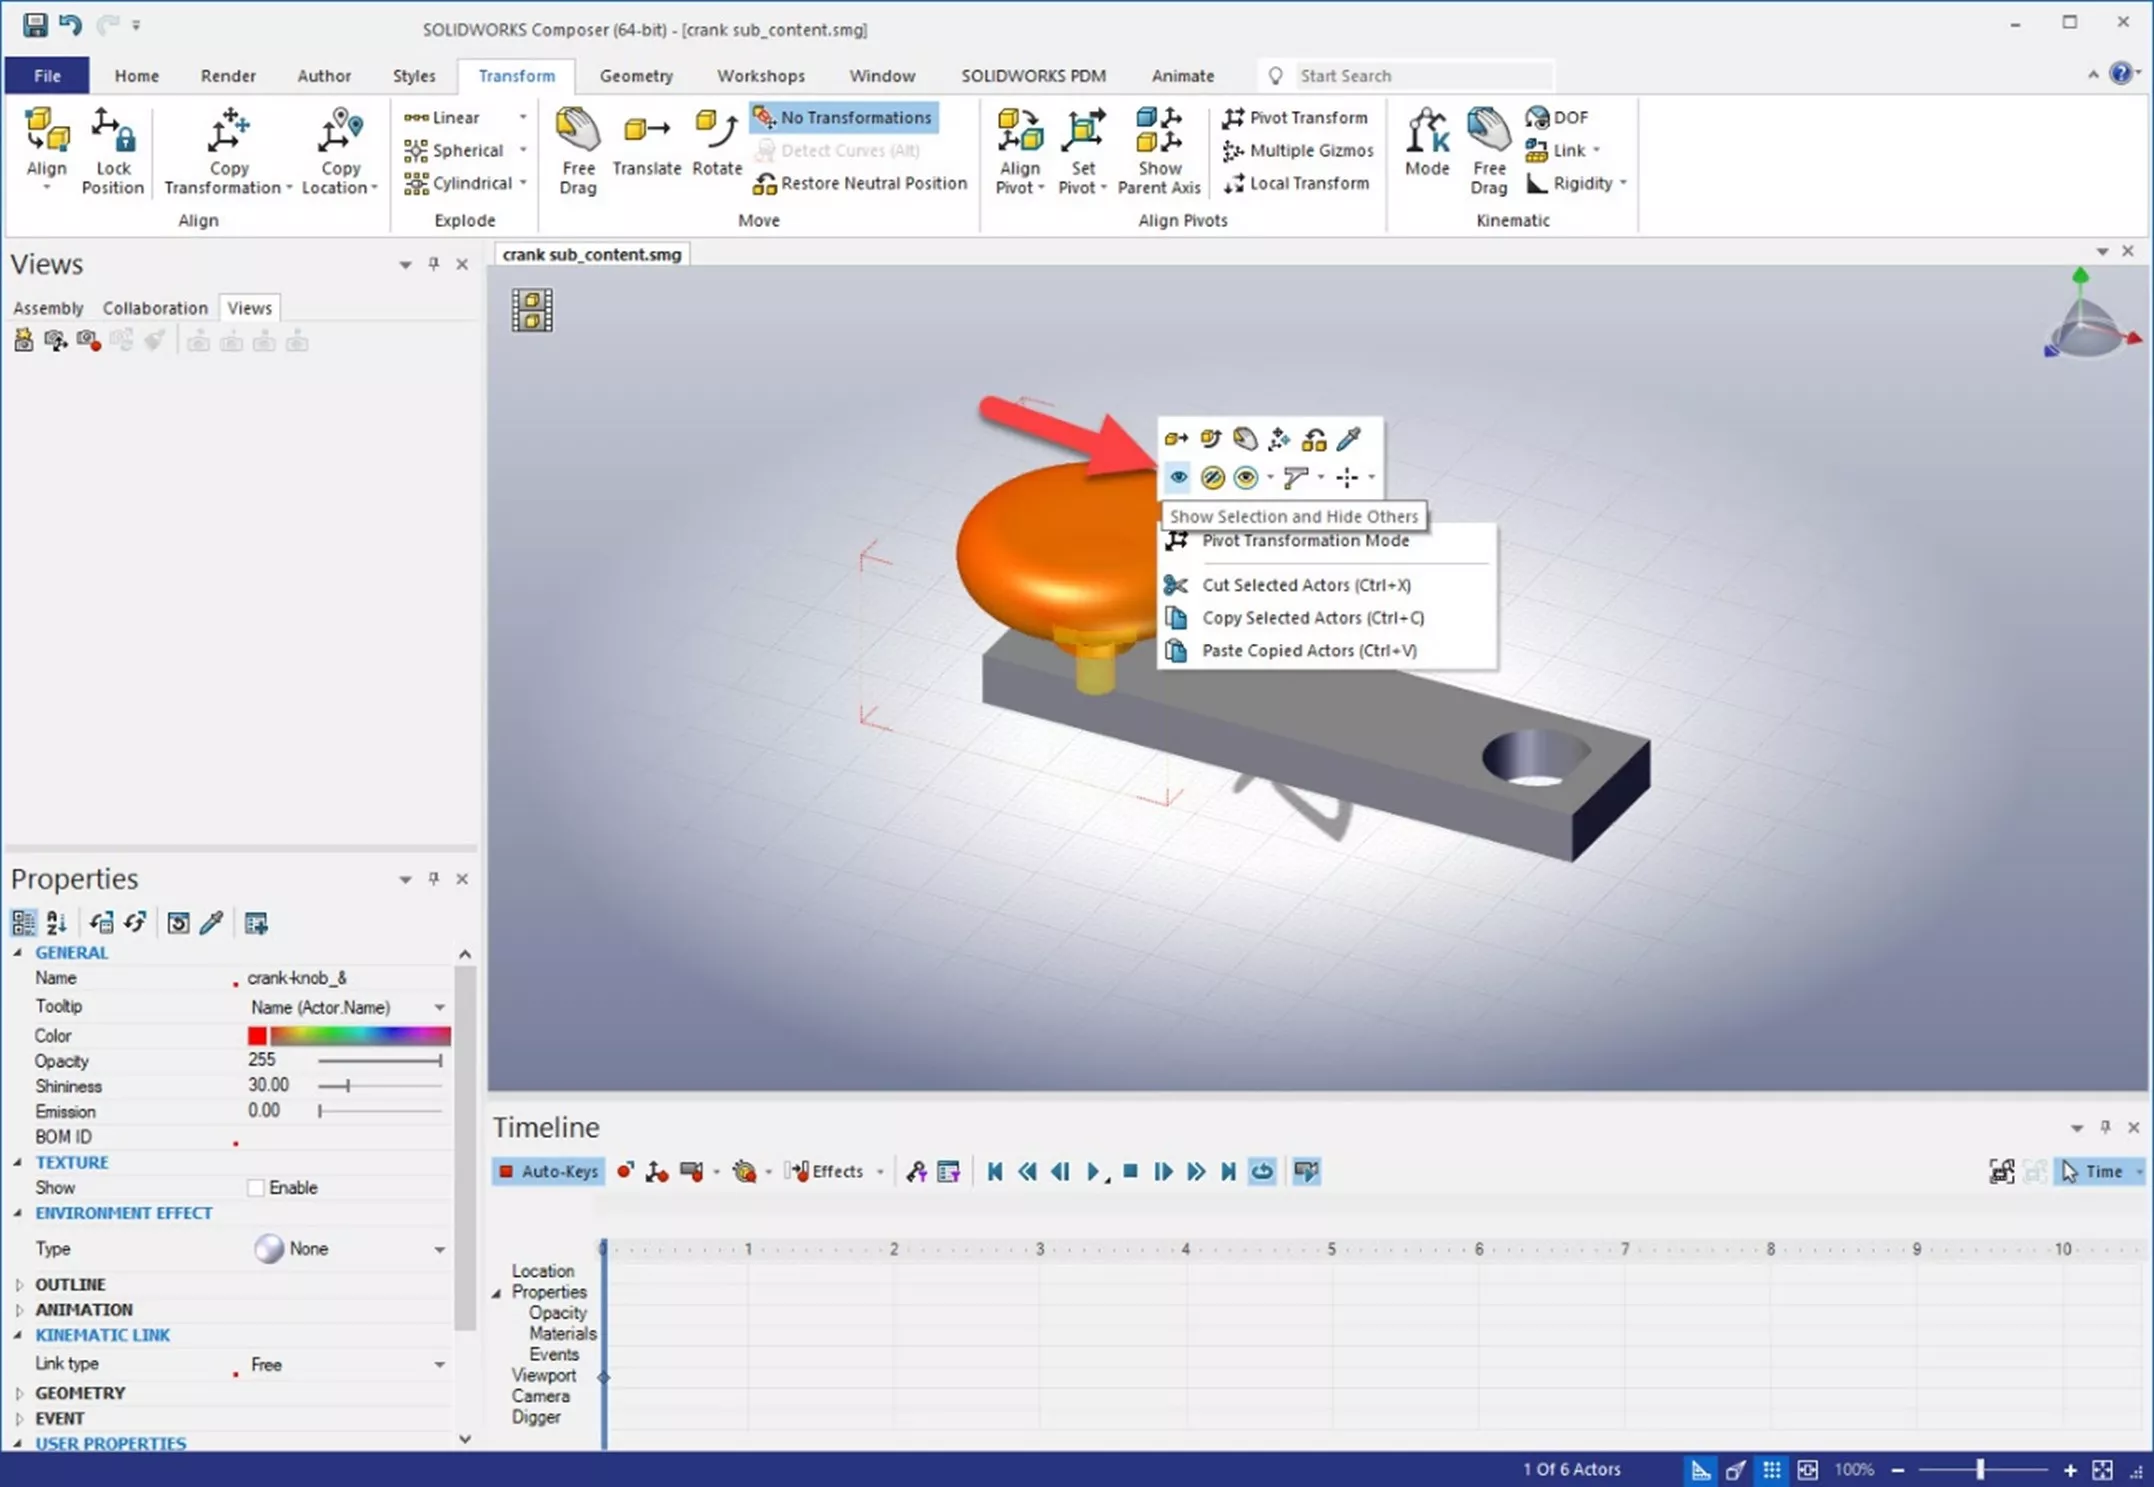 How to Set Up Actors in SOLIDWORKS Composer